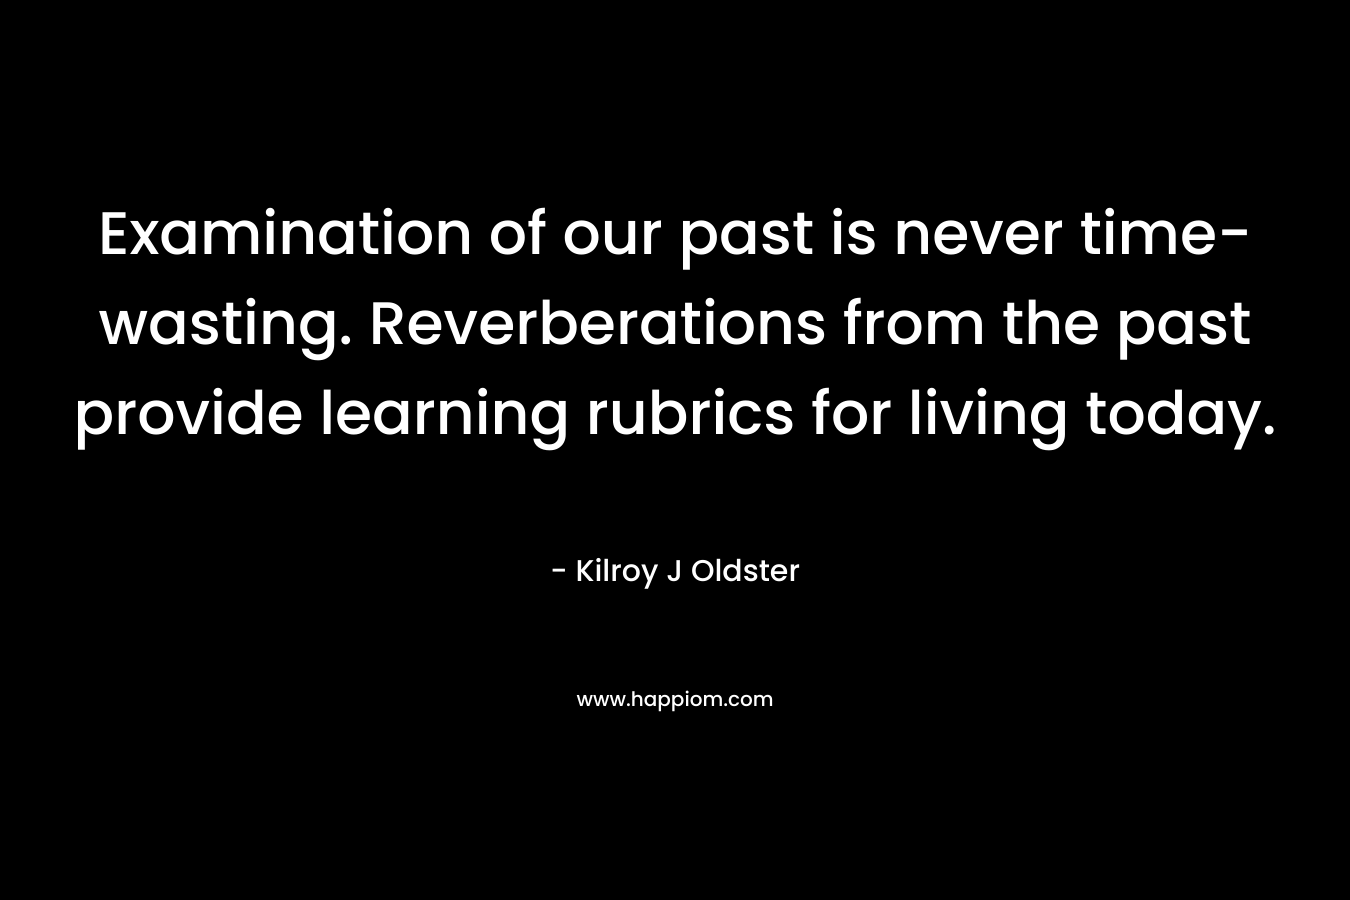 Examination of our past is never time-wasting. Reverberations from the past provide learning rubrics for living today. – Kilroy J Oldster